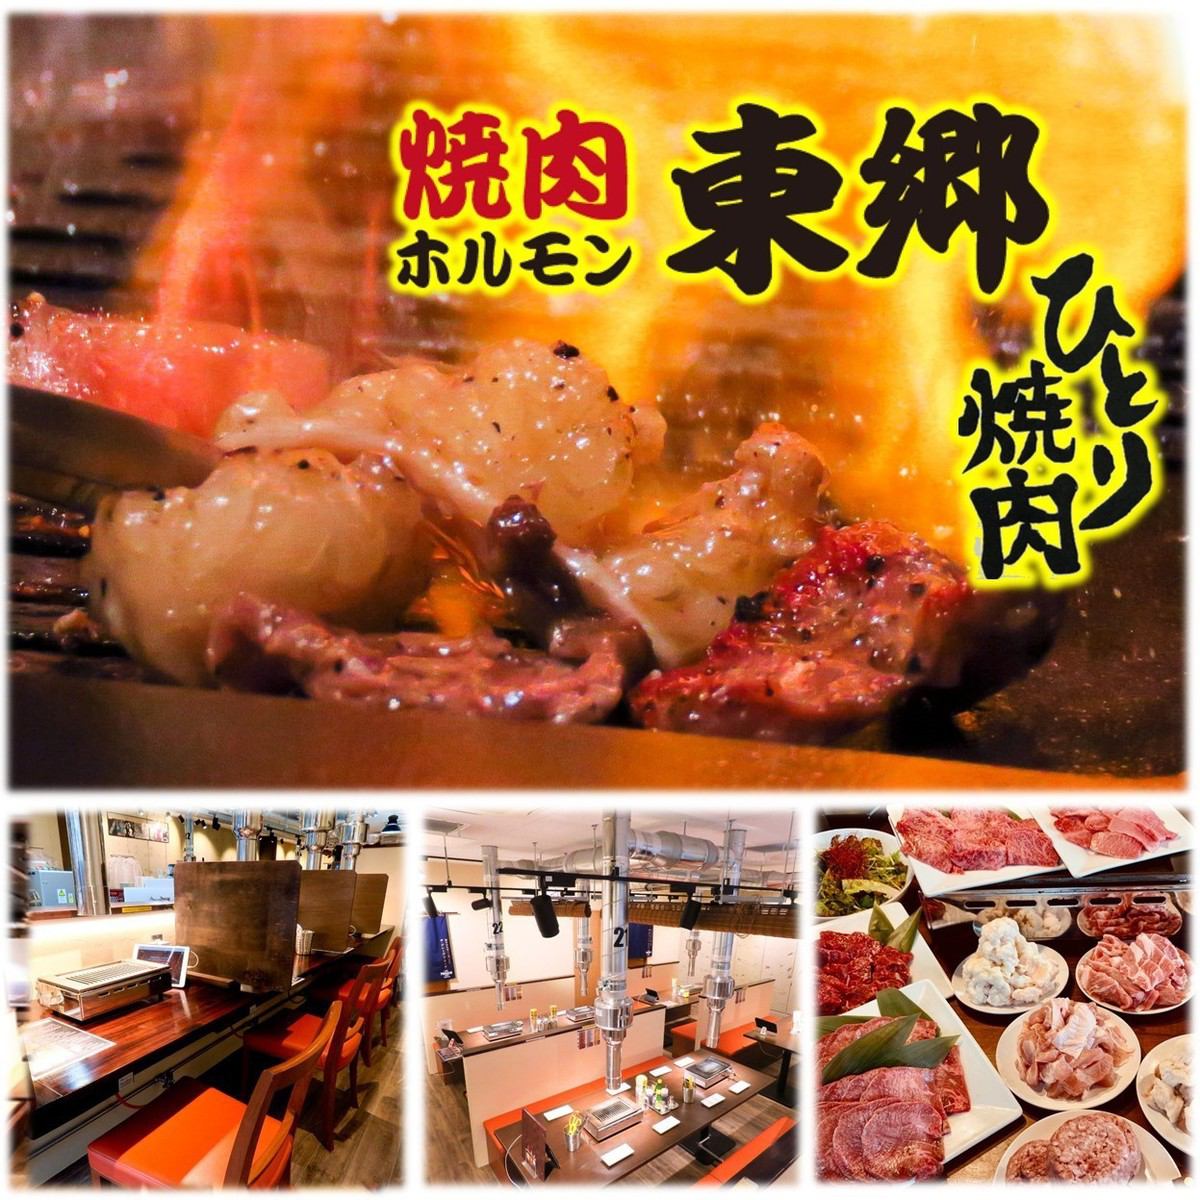 Landing in Nagoya ♪ A restaurant where you can enjoy Yakiniku by yourself! Freshness and taste ◎